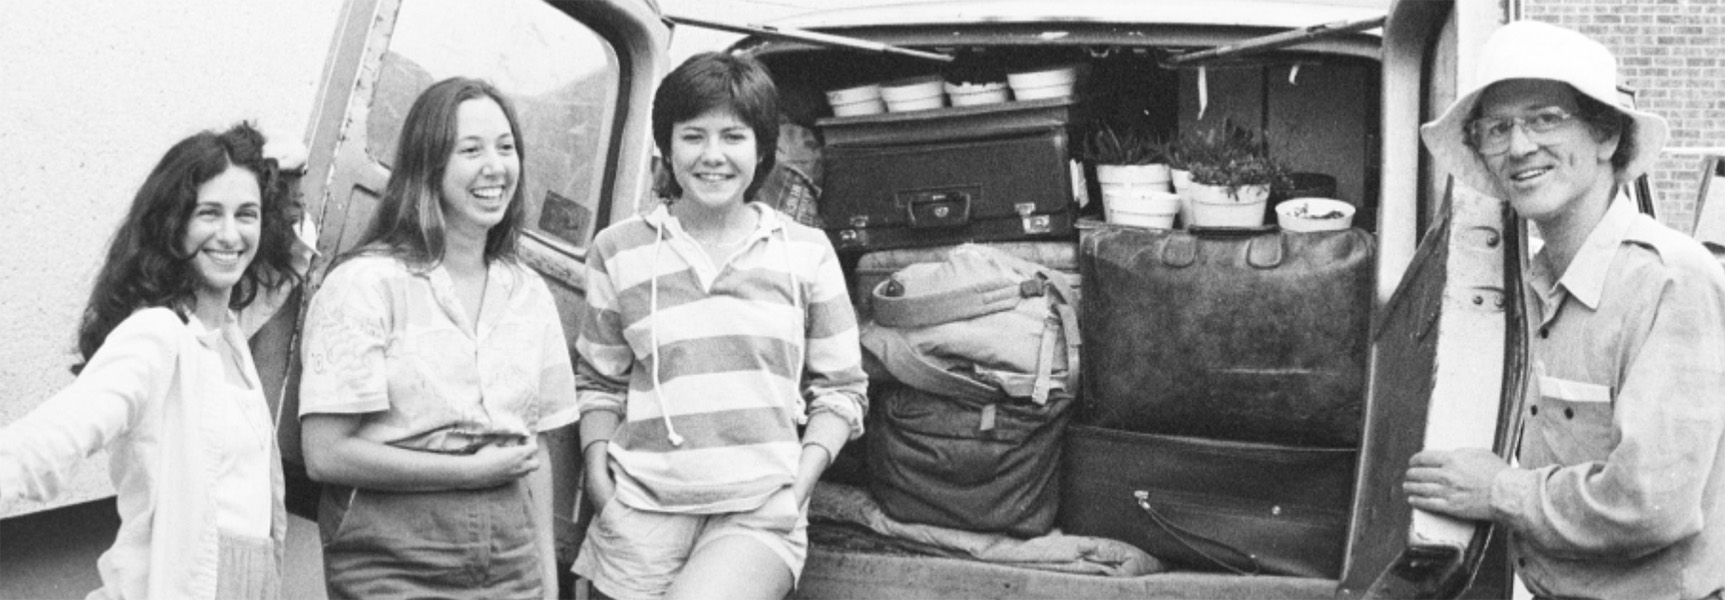 Black and white photograph of four people standing in front of a truck that has its rear doors open, revealing camping supplies inside.